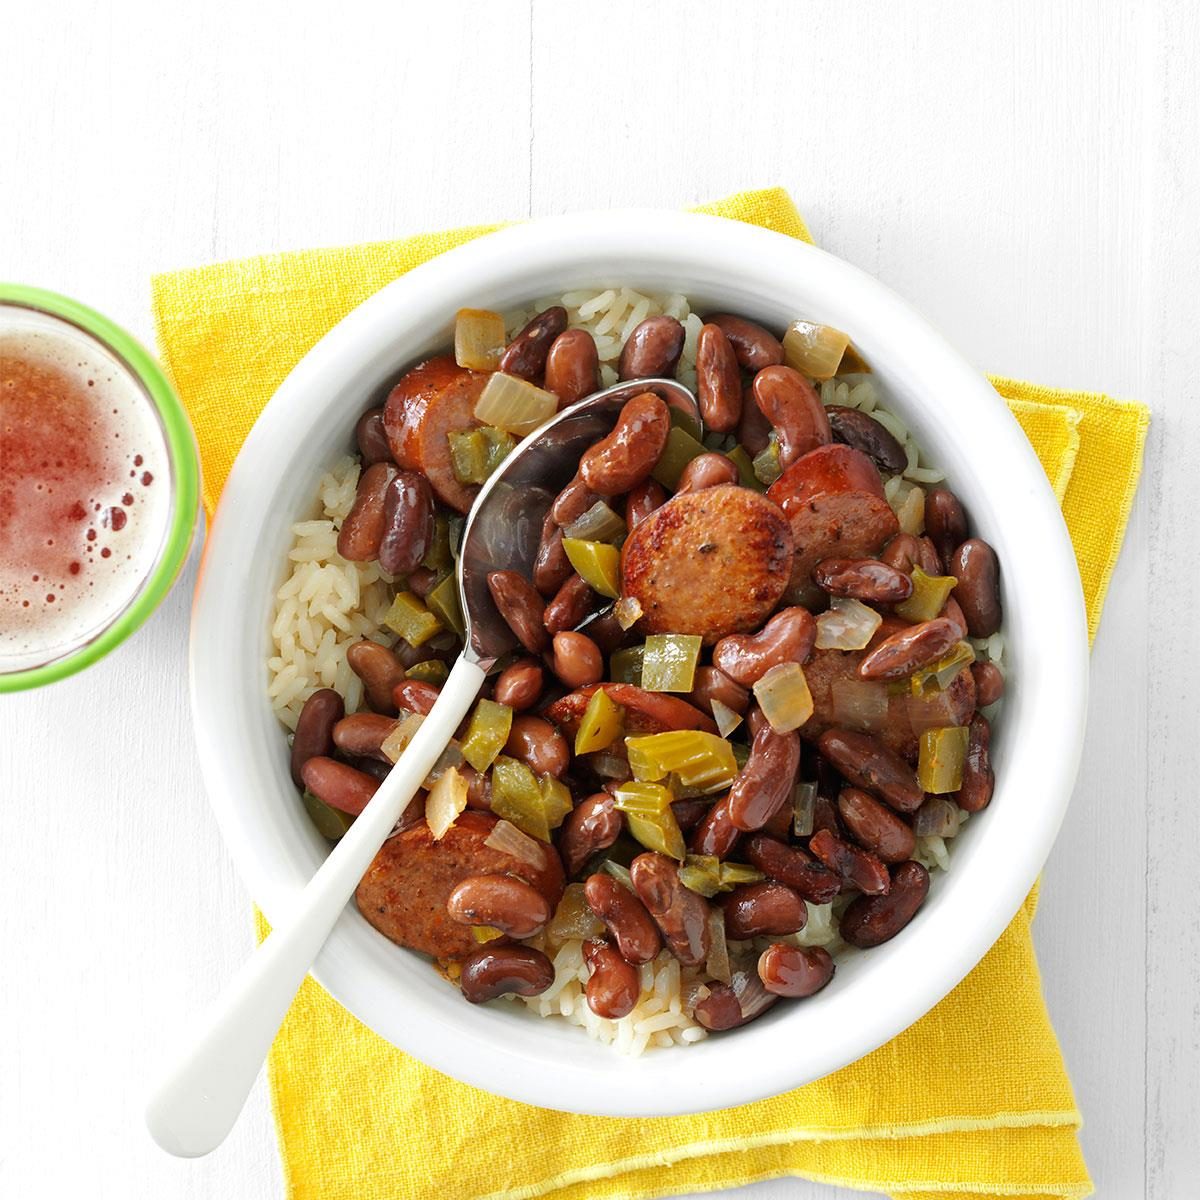 Wednesday: Slow Cooker Red Beans & Sausage